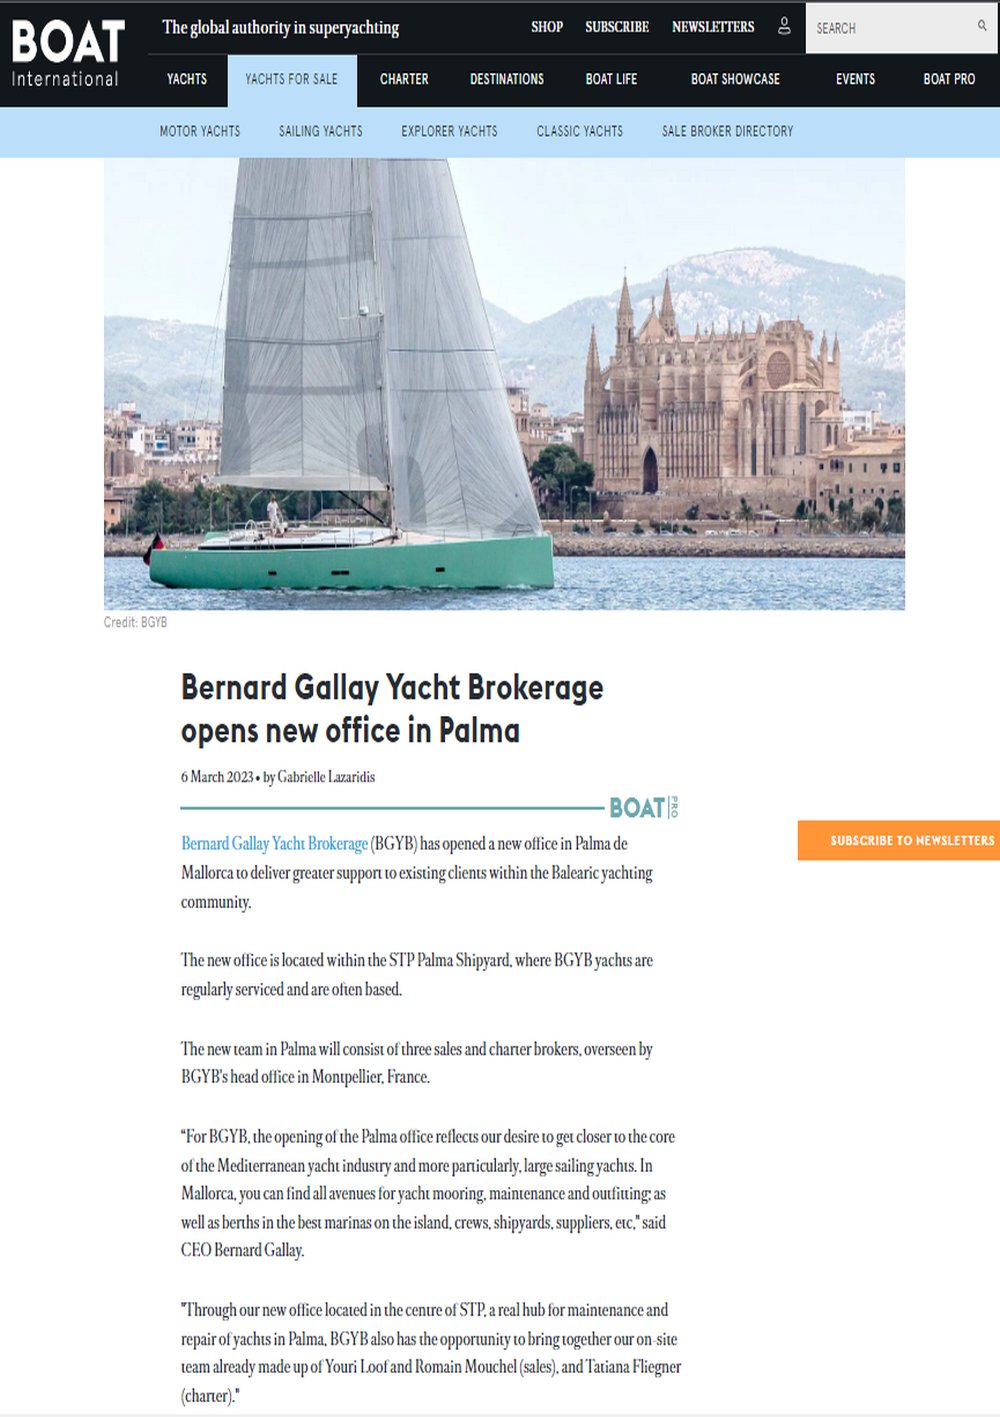 Boat International magazine announces the opening of the new BGYB office in Palma